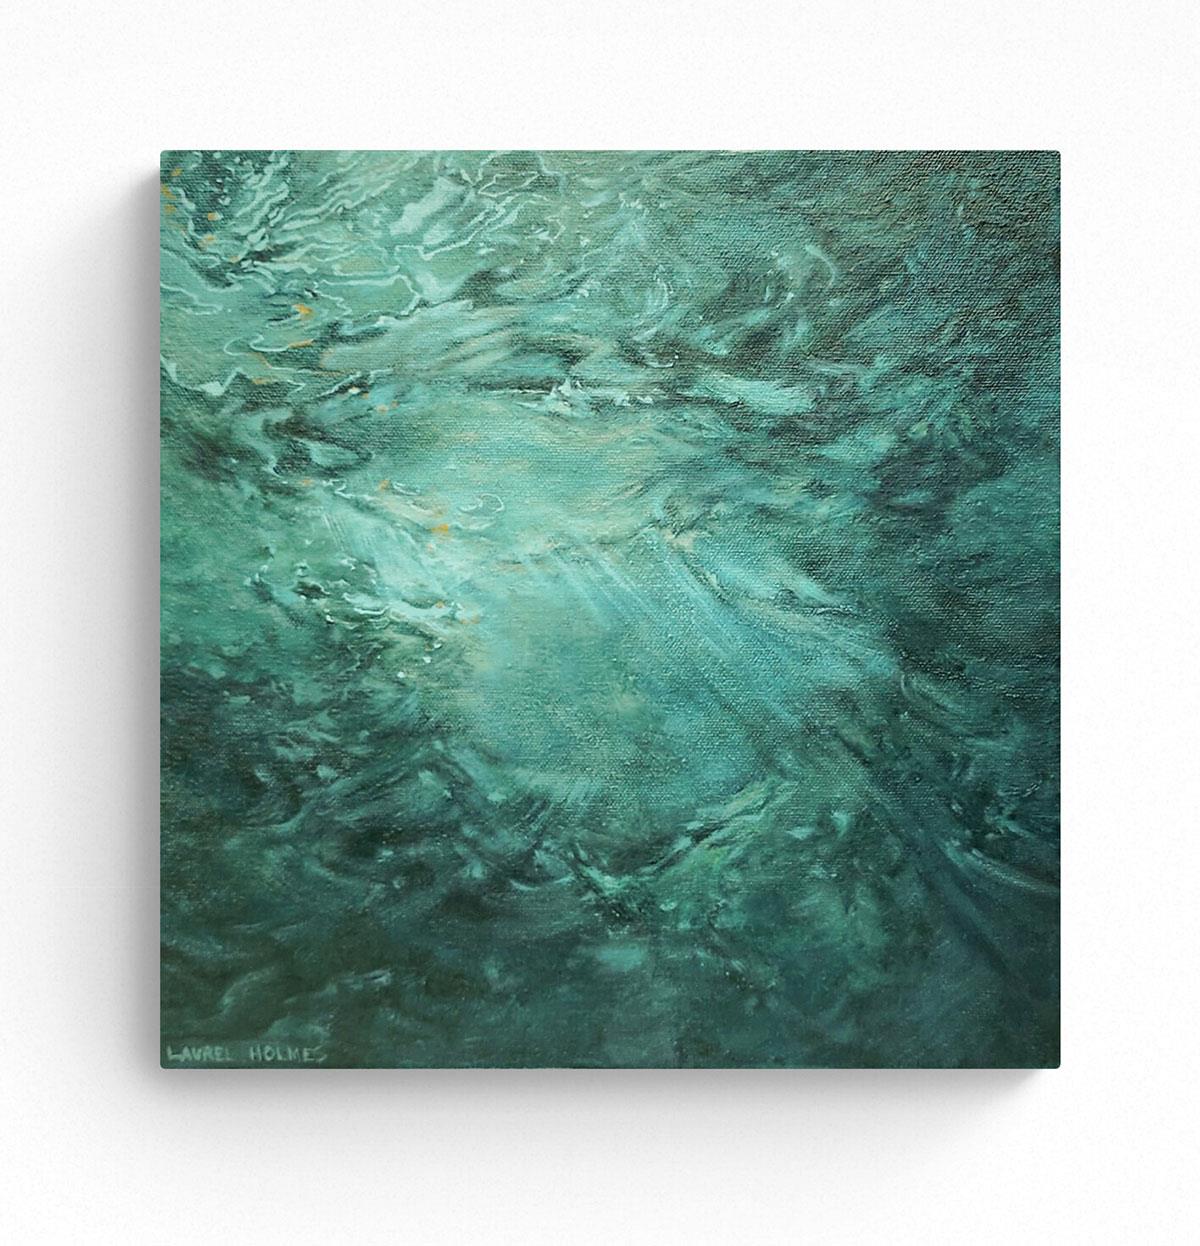 A small oil painting of a ray of light shining underwater